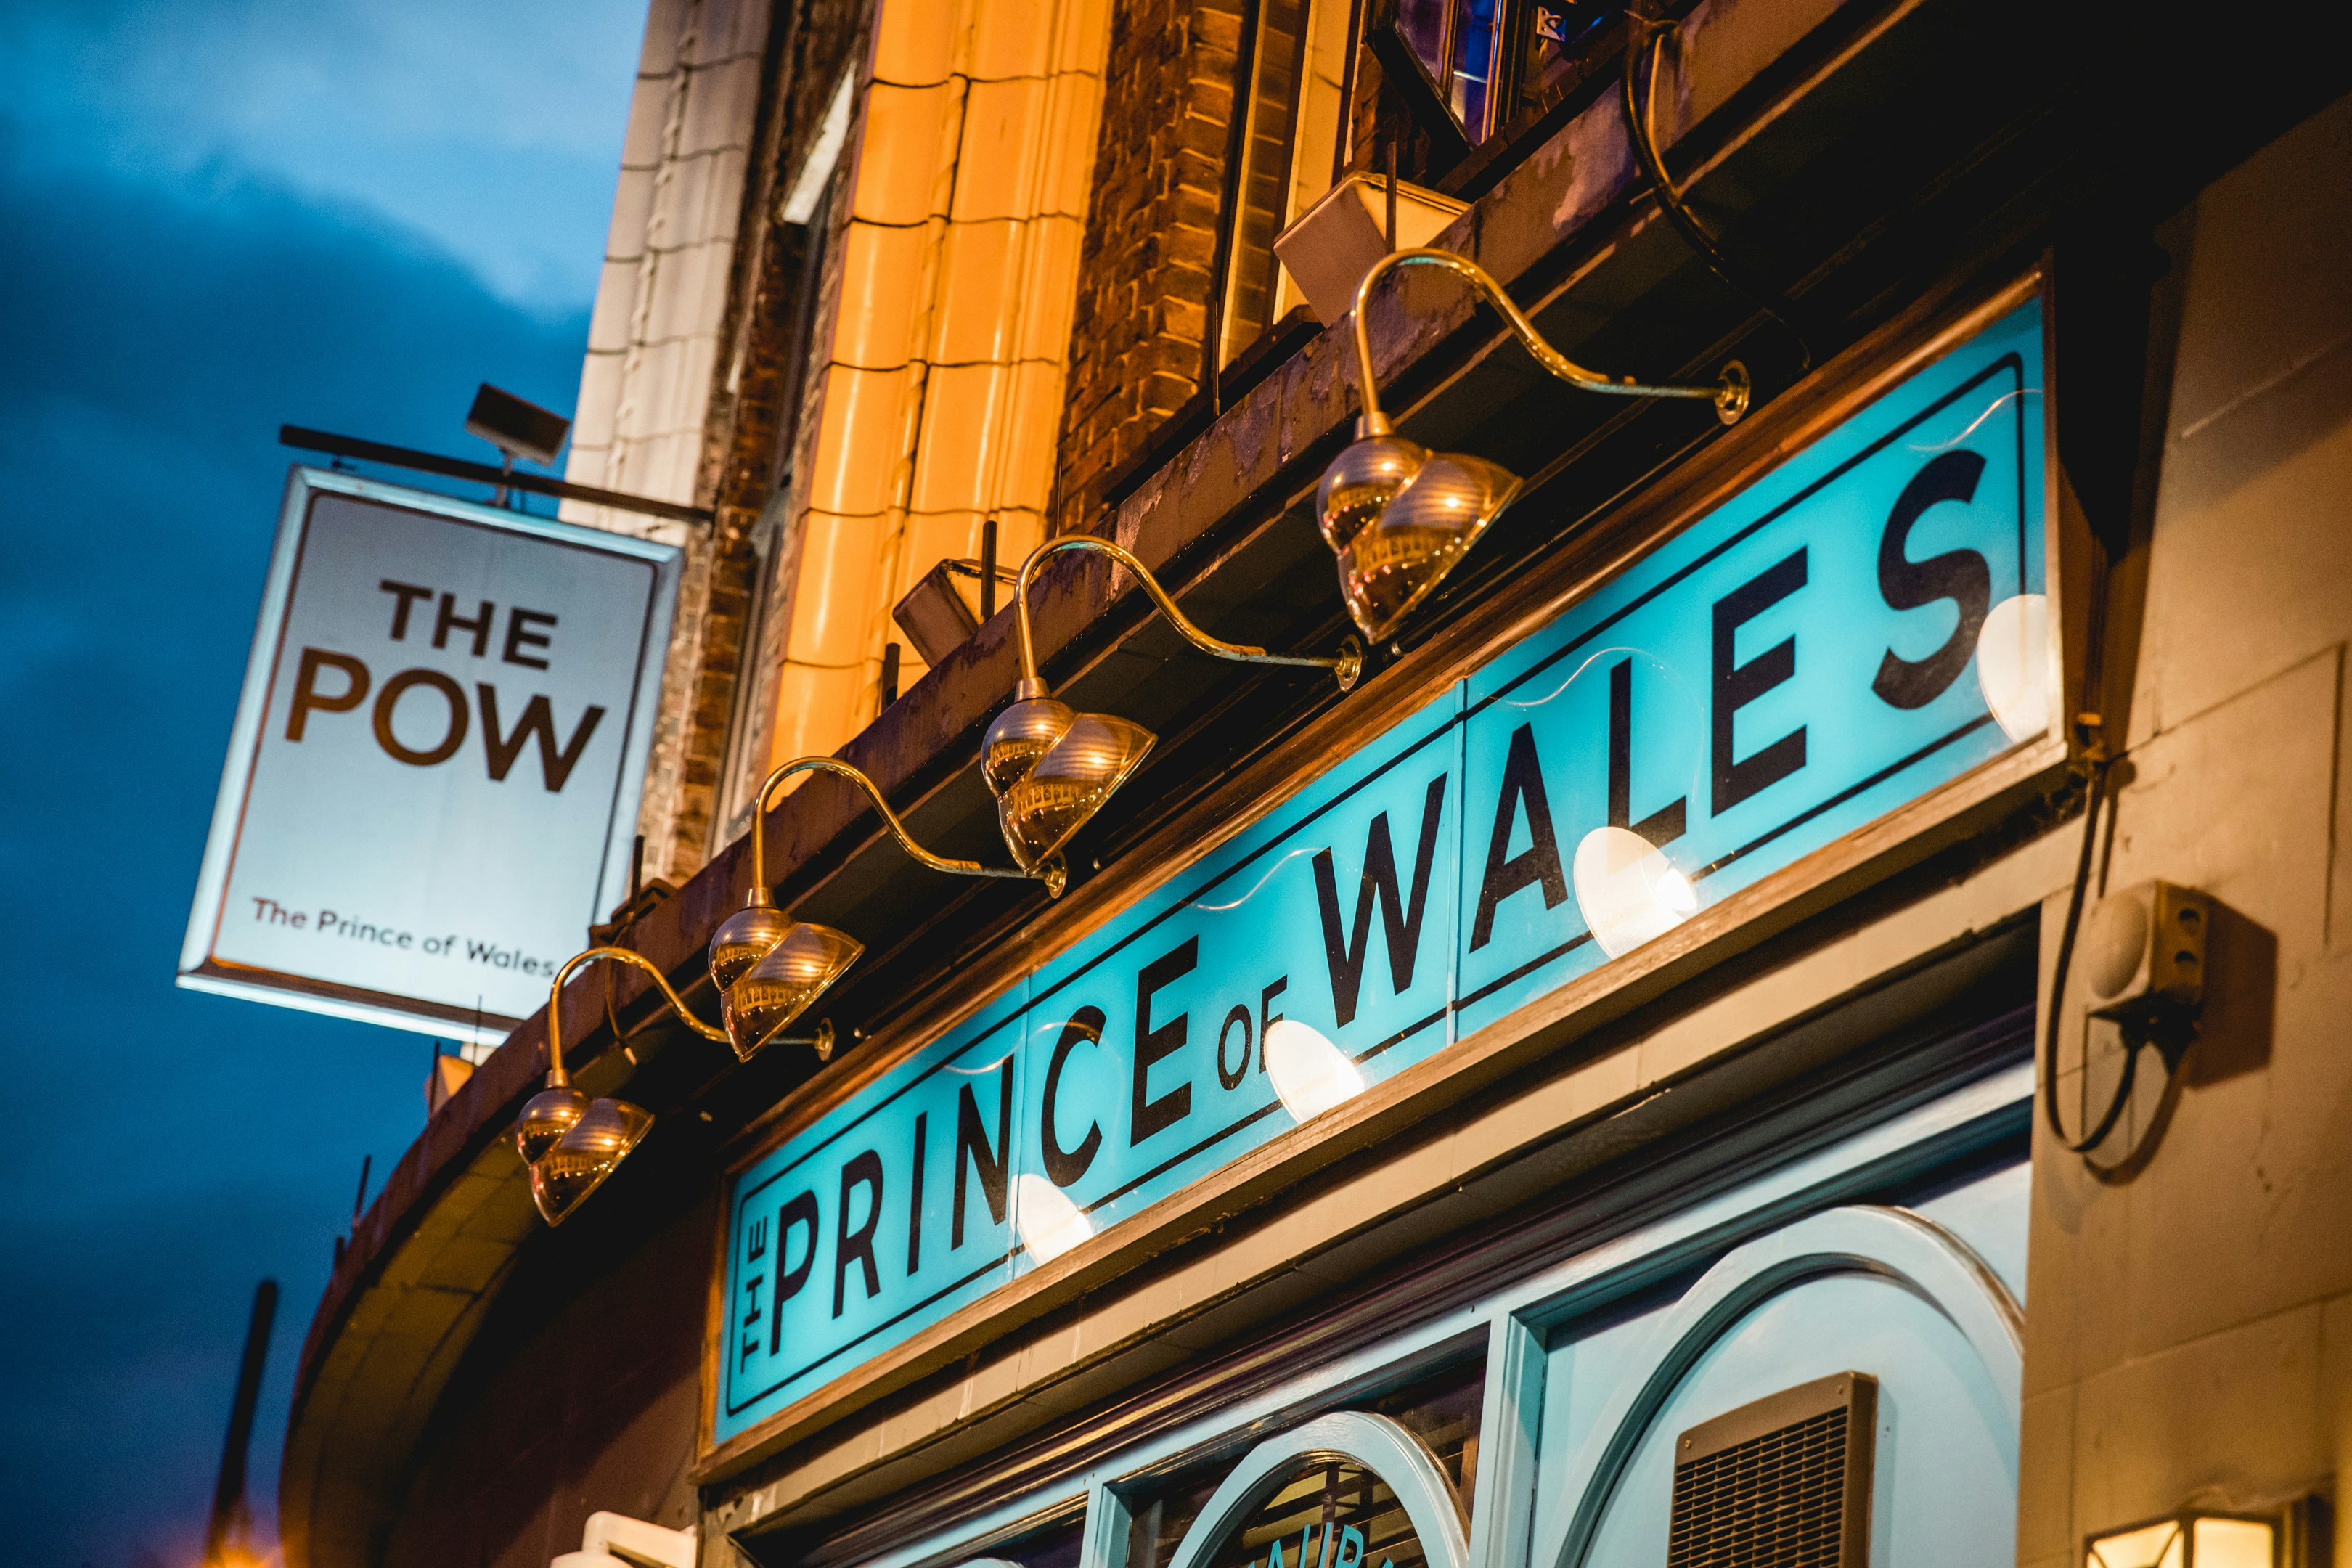 The Prince Of Wales Brixton - Pub image 3